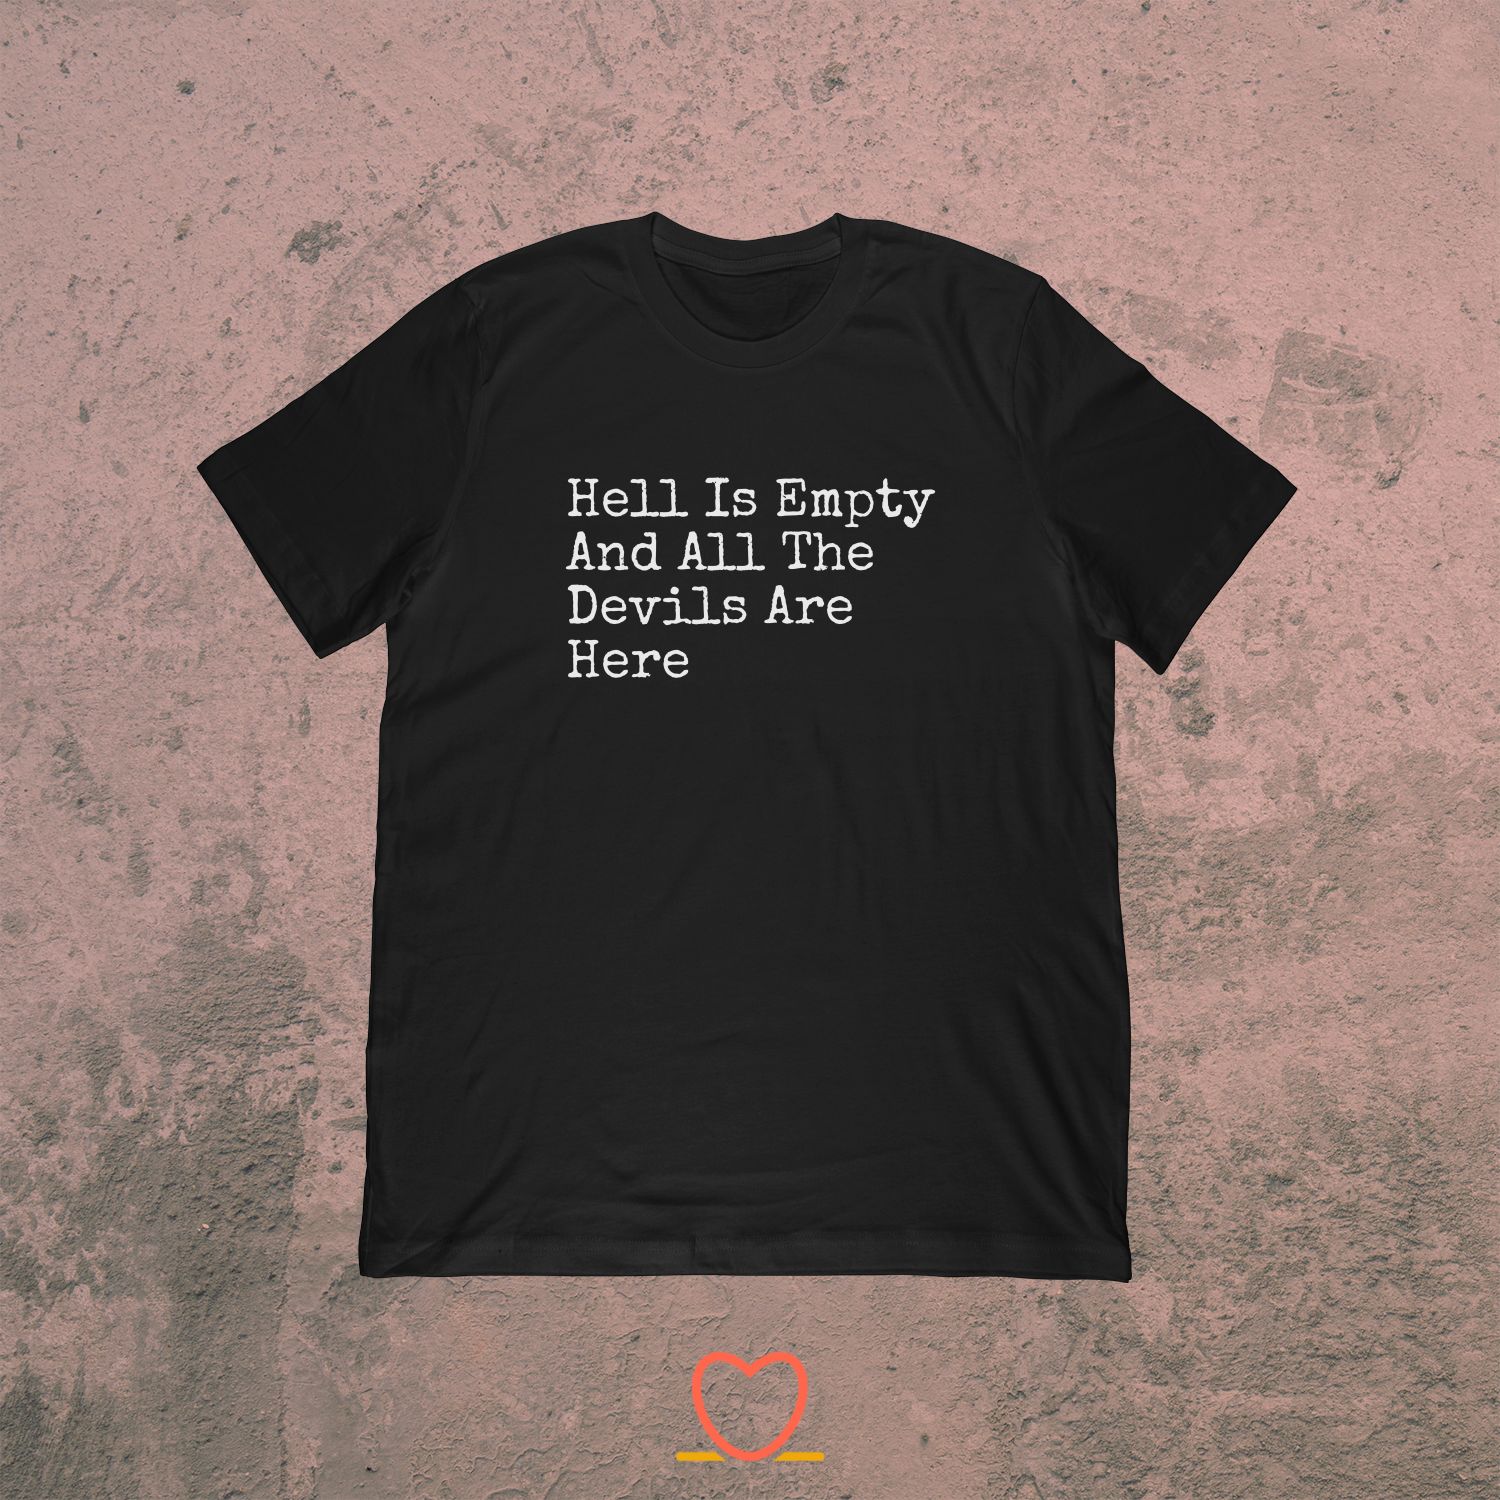 Hell Is Empty And All Devils Are Here – Shakespeare Tee